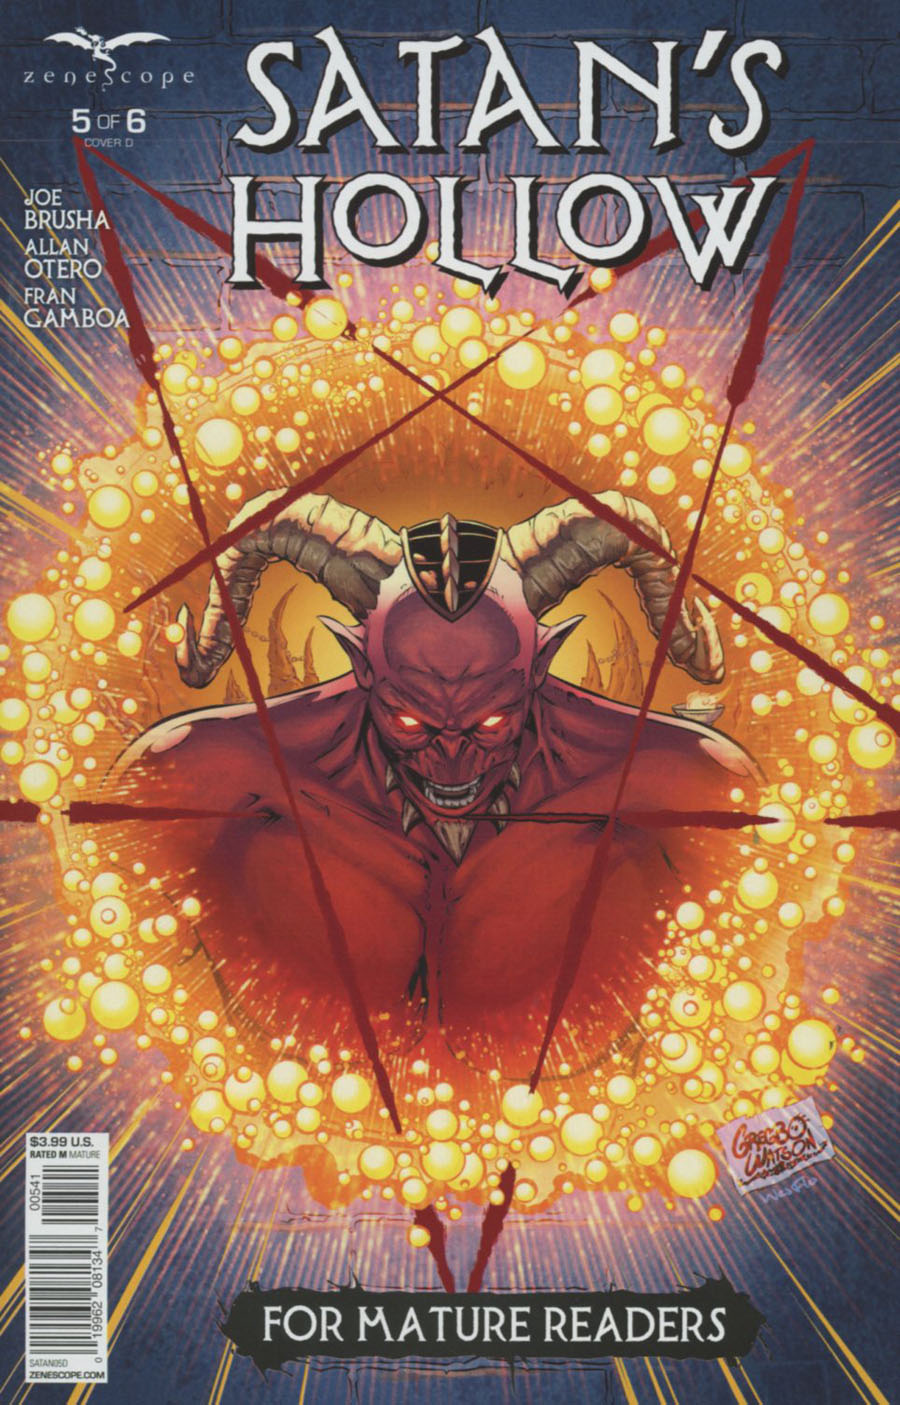 Grimm Fairy Tales Presents Satans Hollow #5 Cover D Gregbo Watson